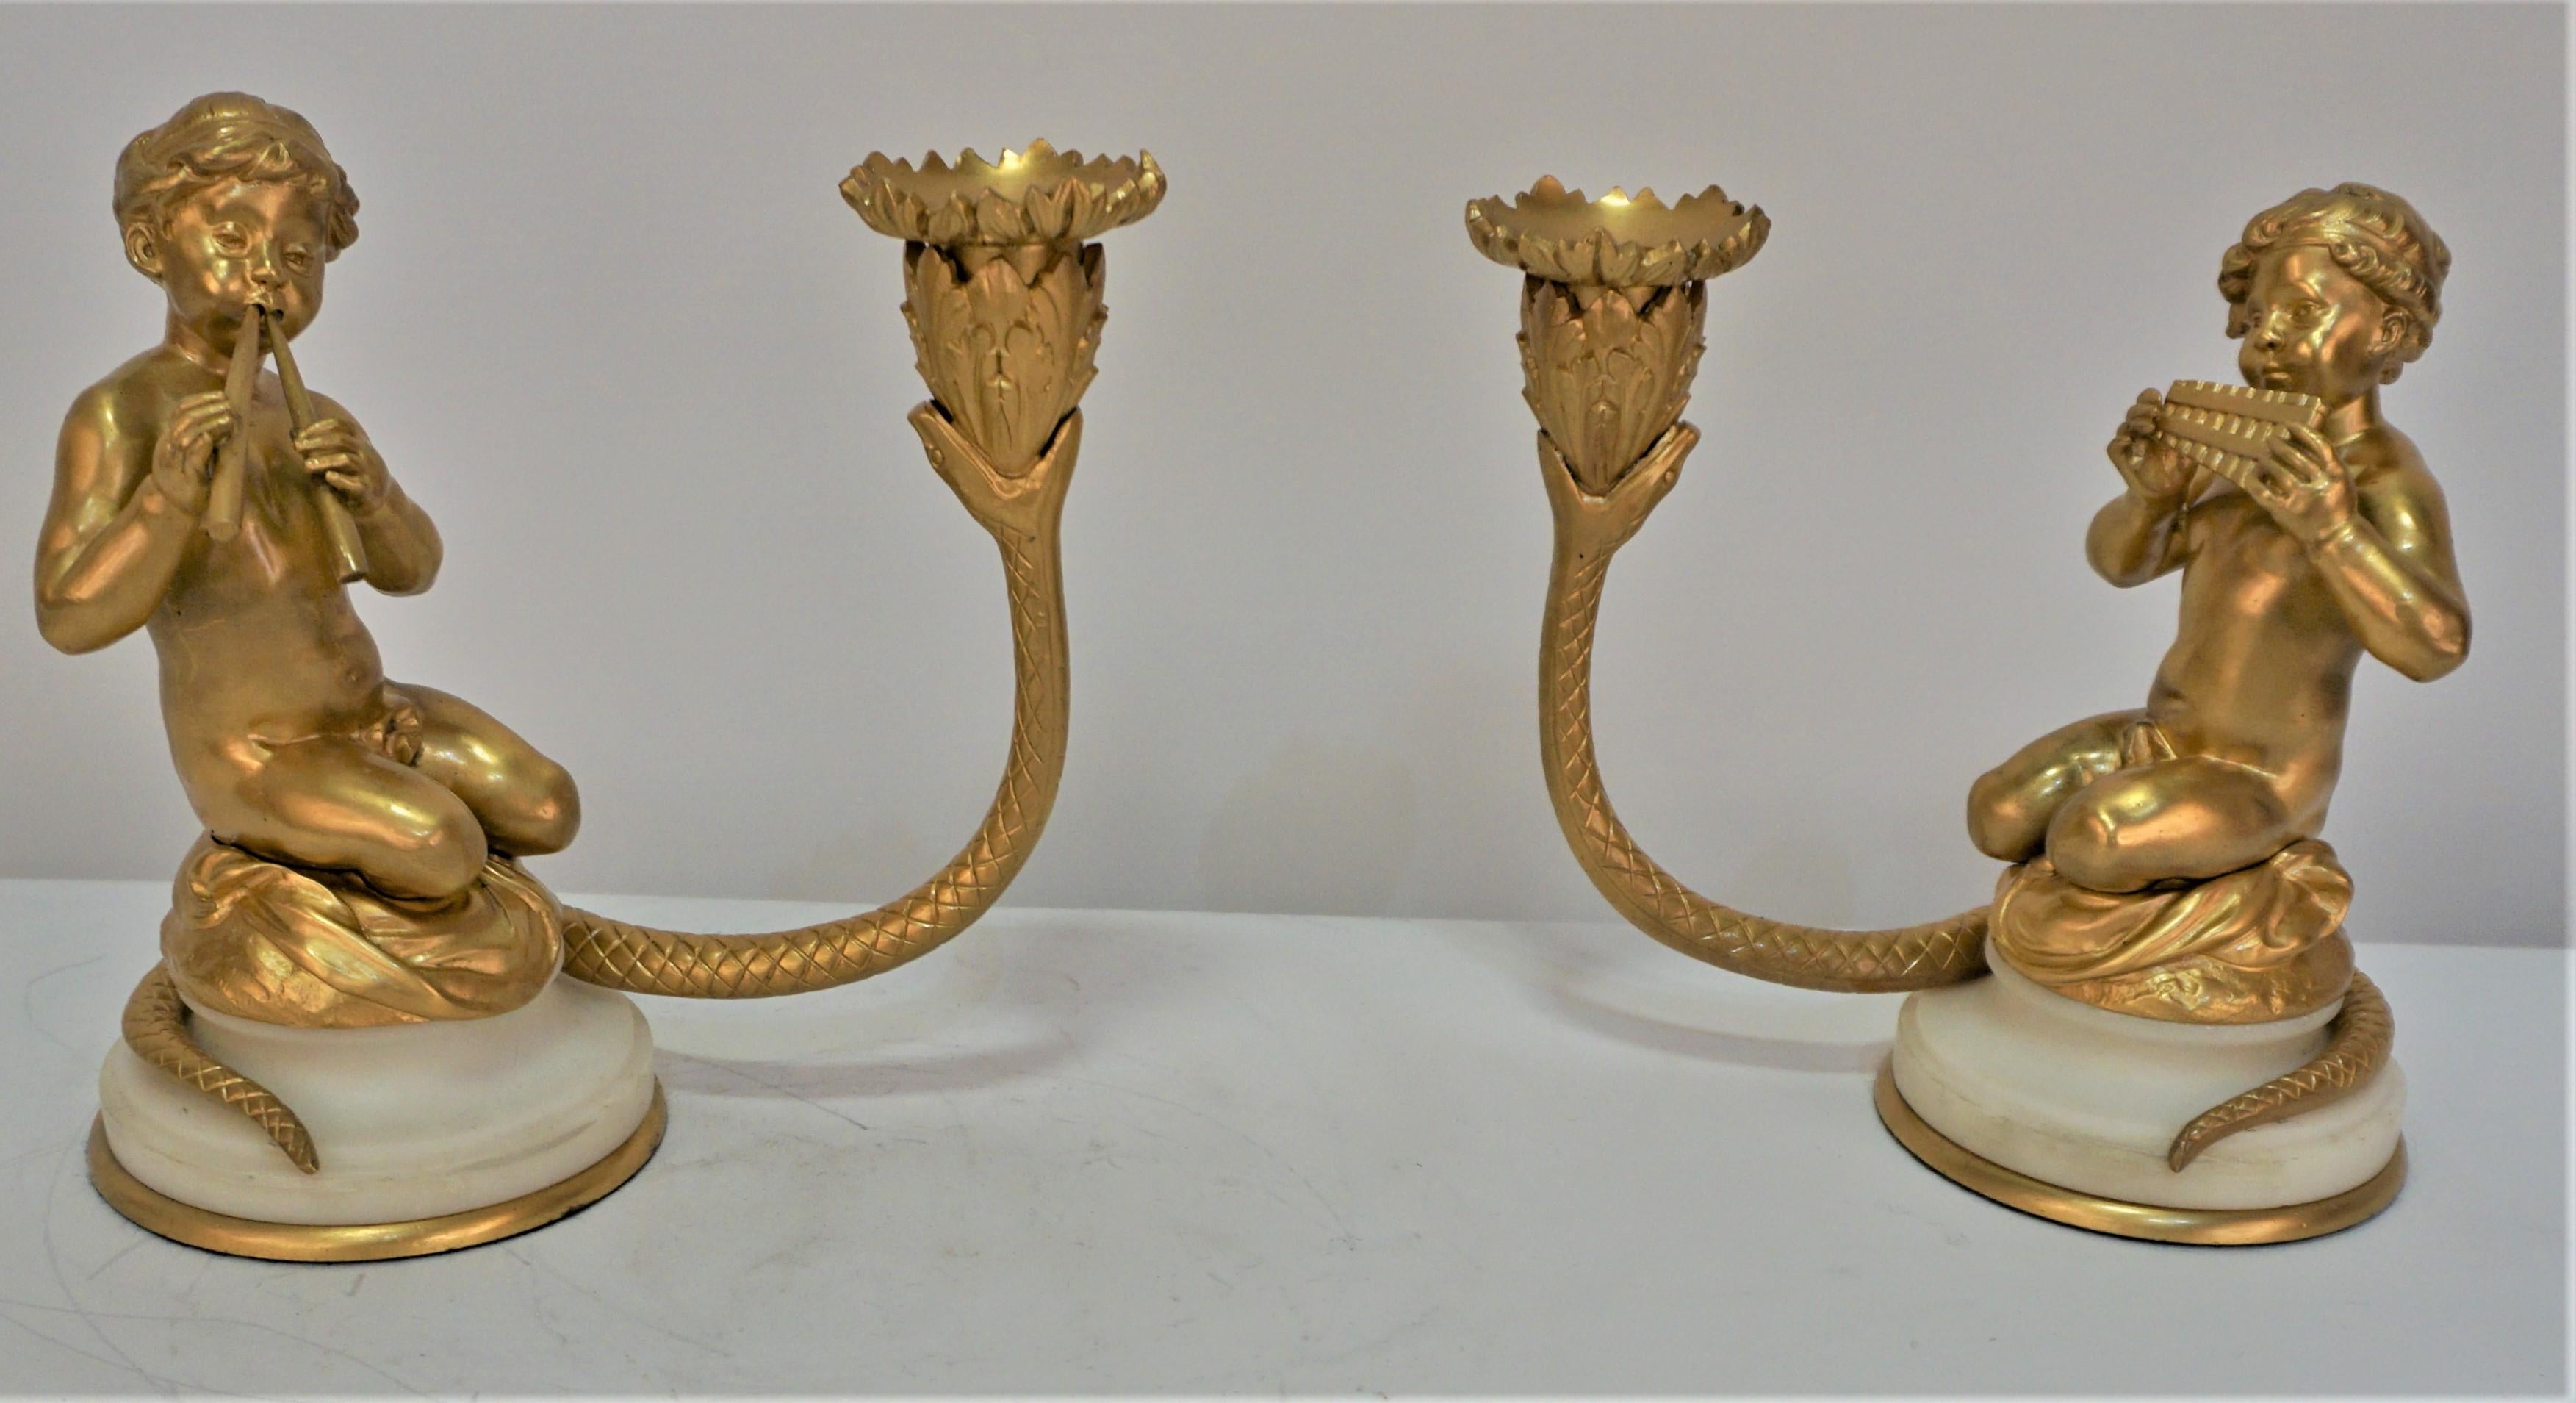 Rare pair of 19th century Dore bronze and marble candlesticks.